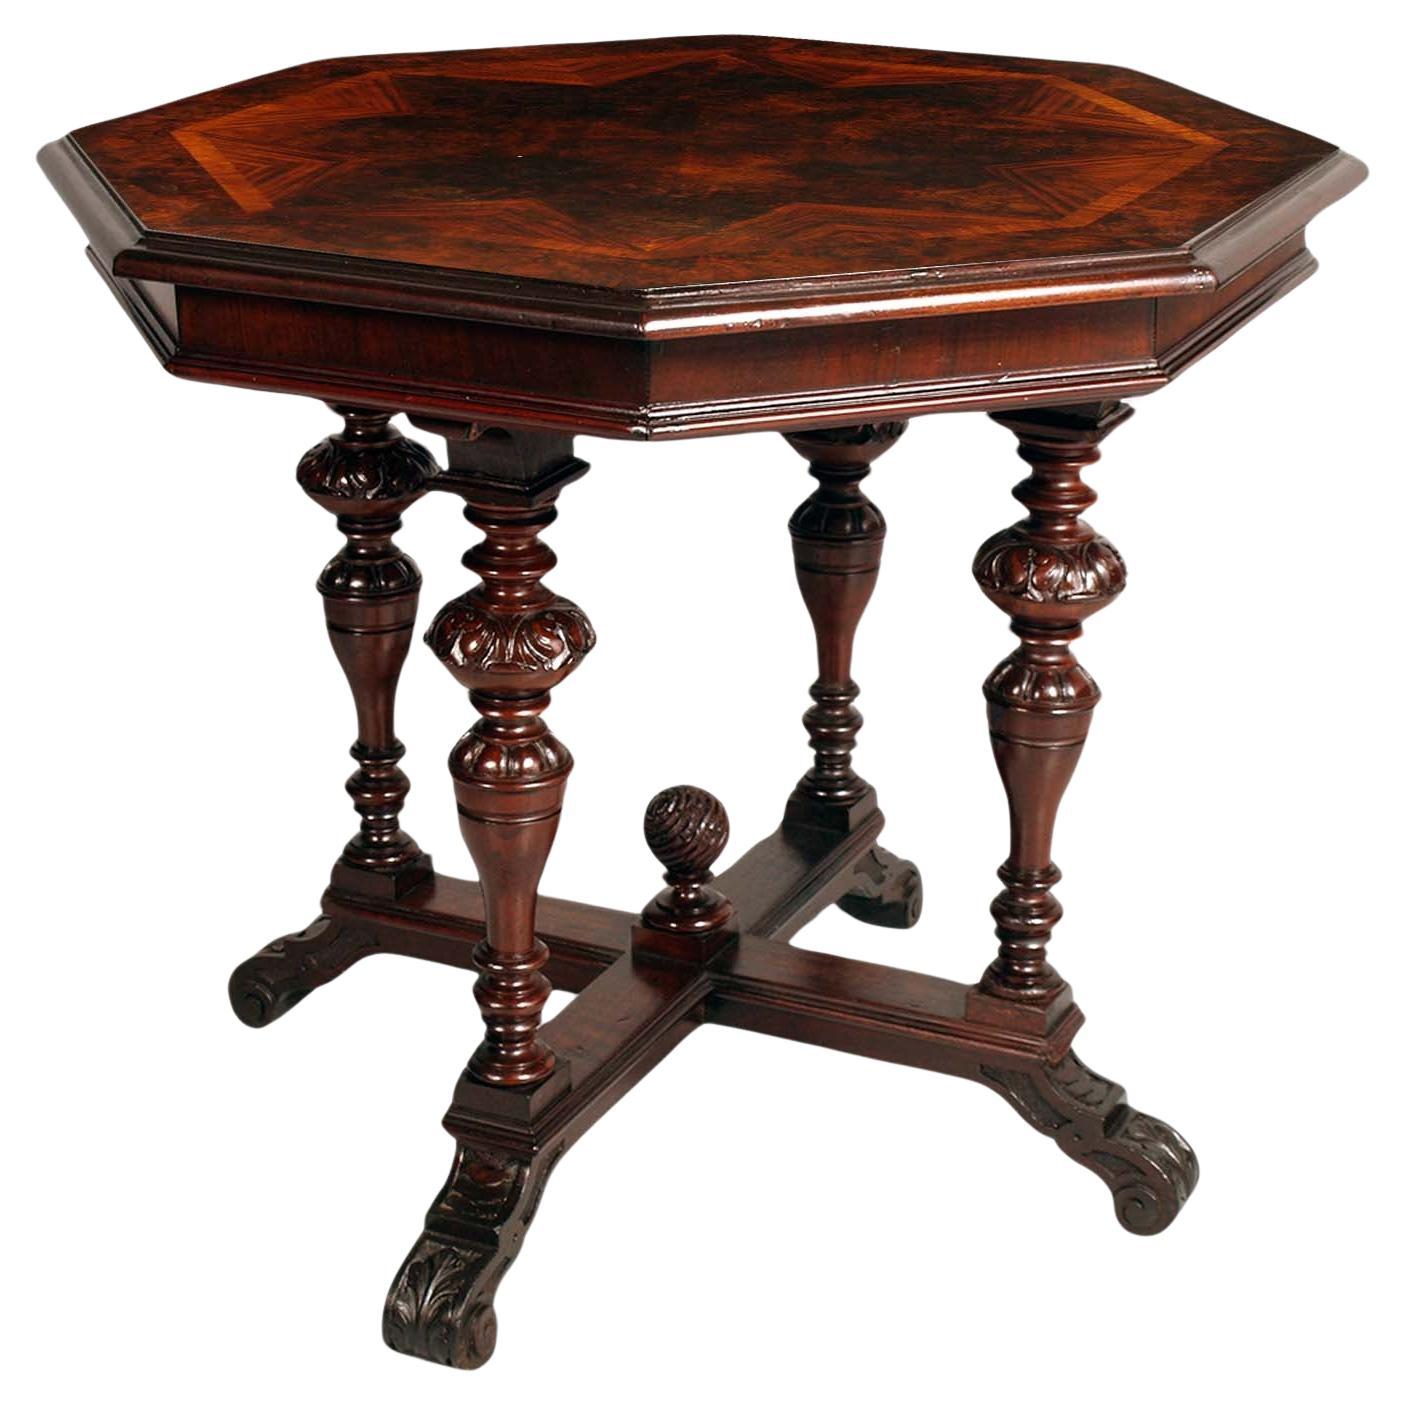 19th Century Venetian Renaissance Octagonal Table in Walnut by Testolini Freres For Sale